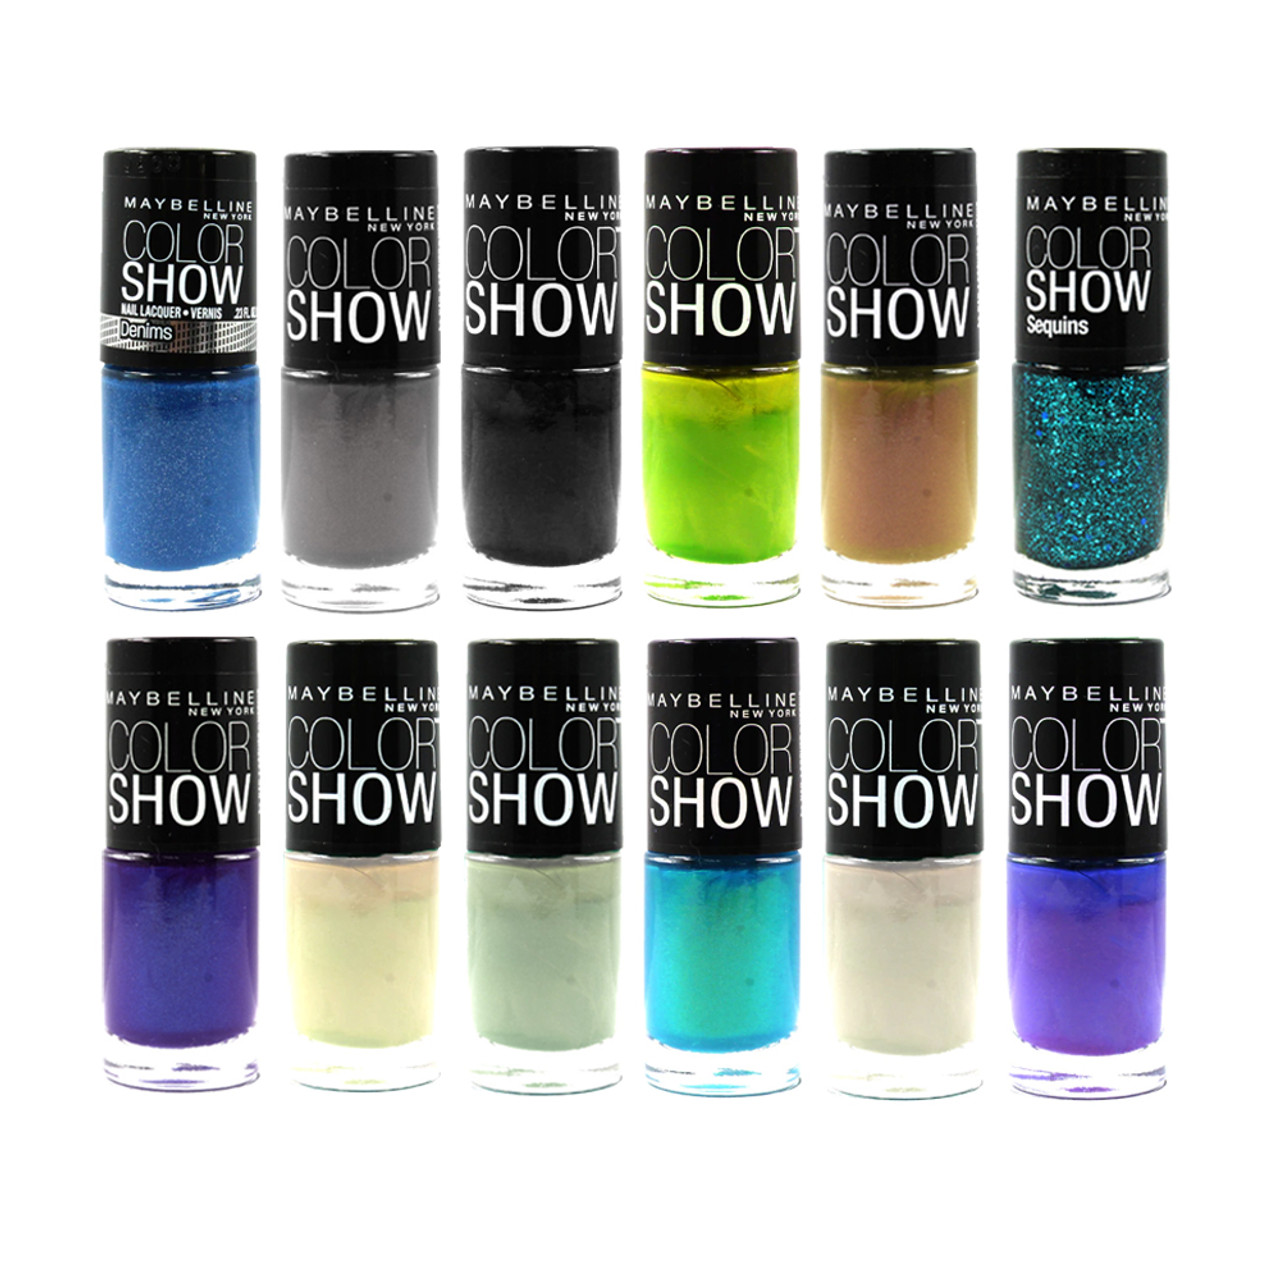 Lacquer Color Maybelline 12-Pack Show Nail